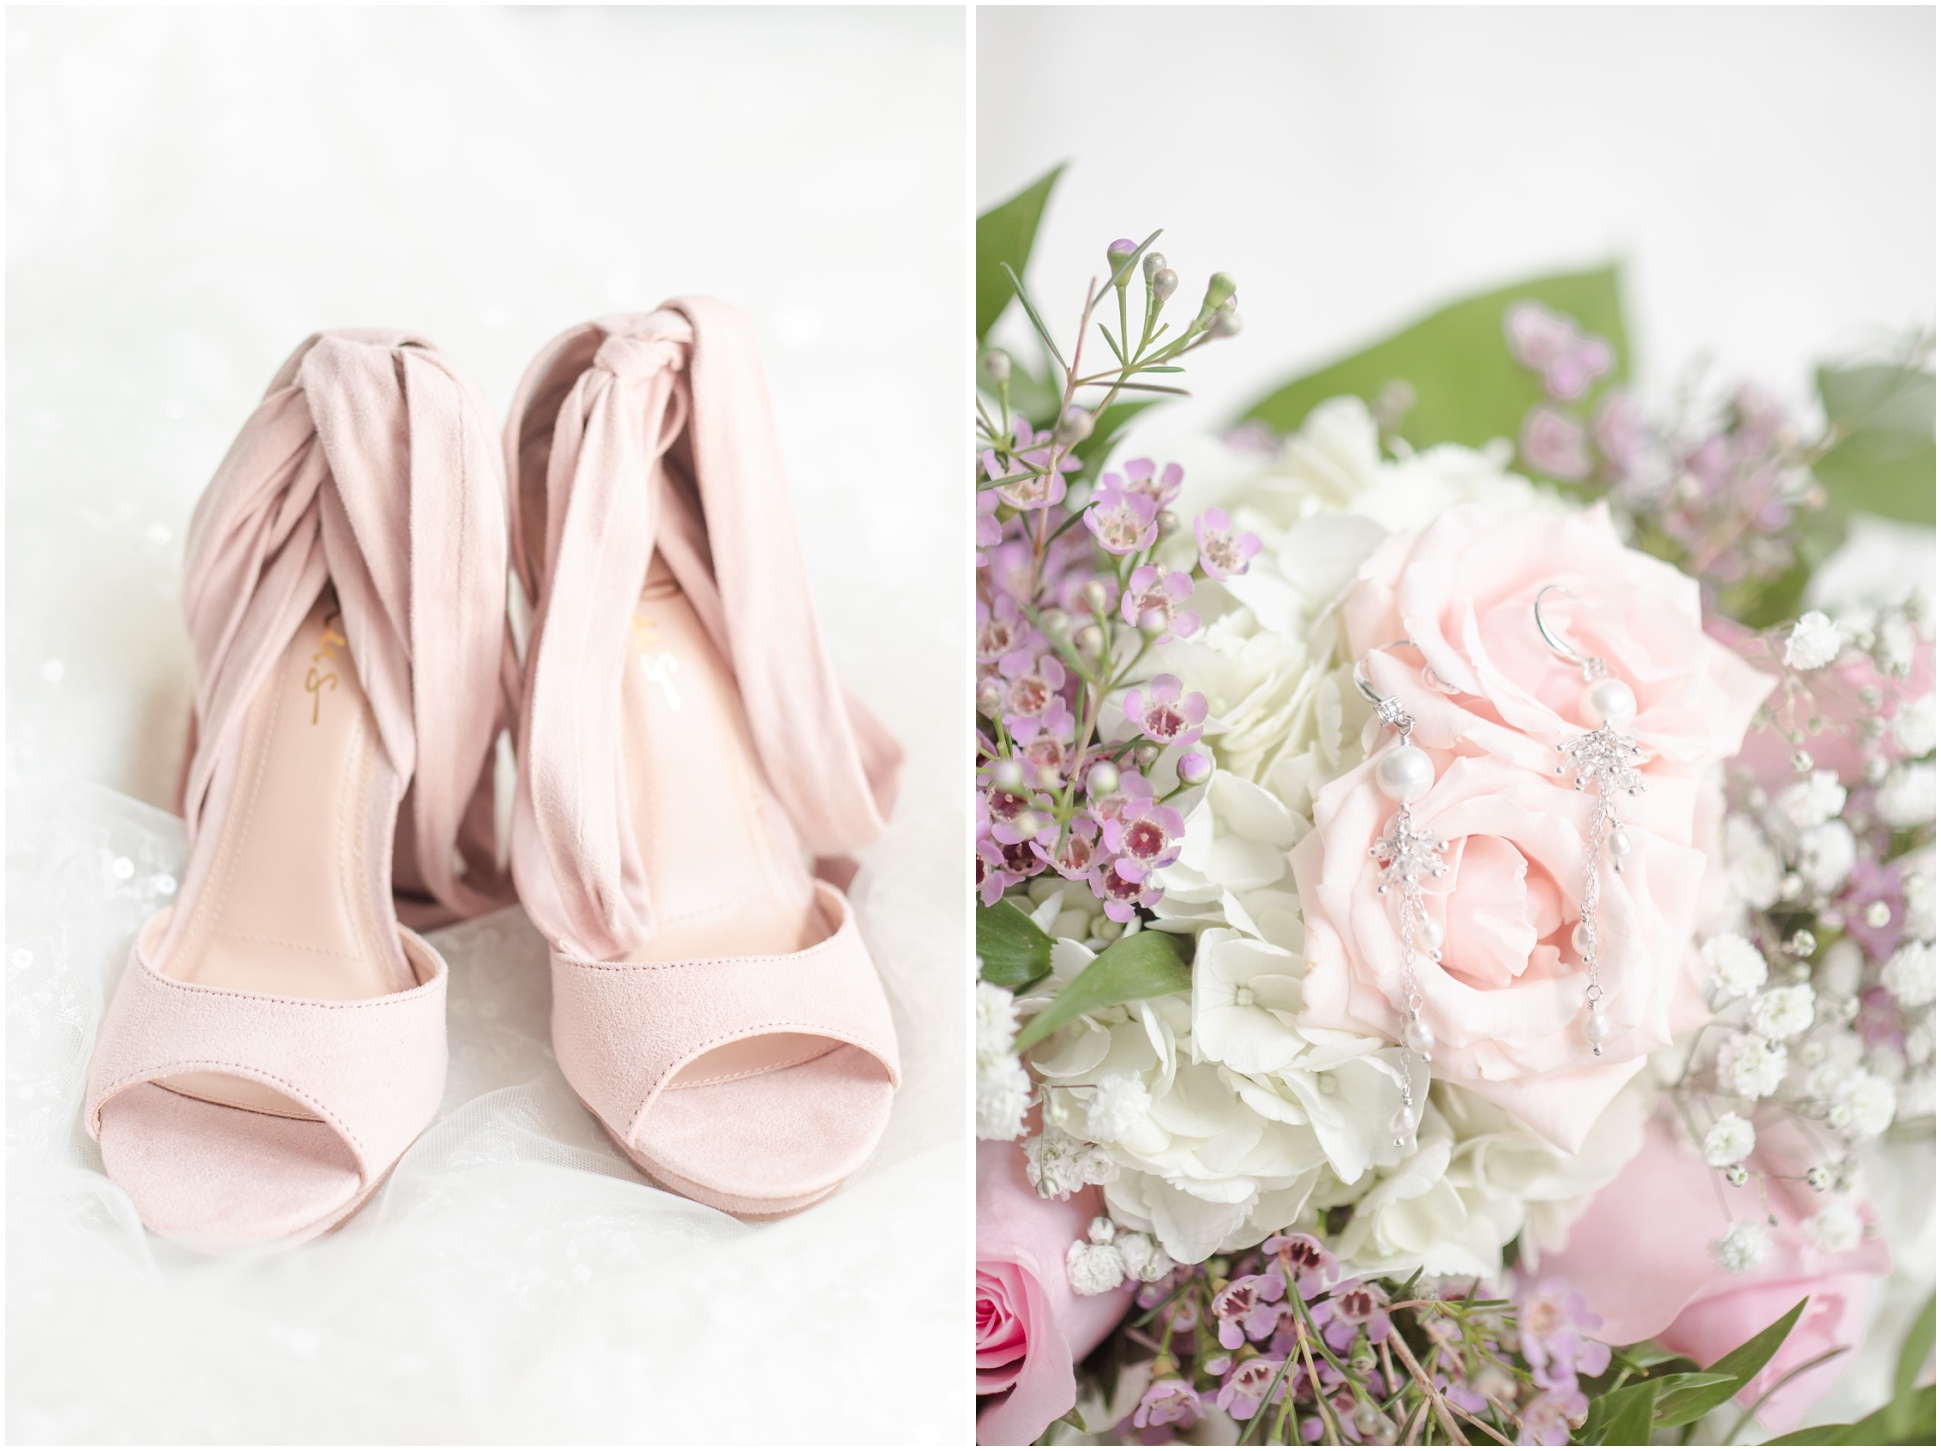 Left, Blush Velvet Heels with Ties, Right: Bouquet with Blush florals and and earrings hanging down